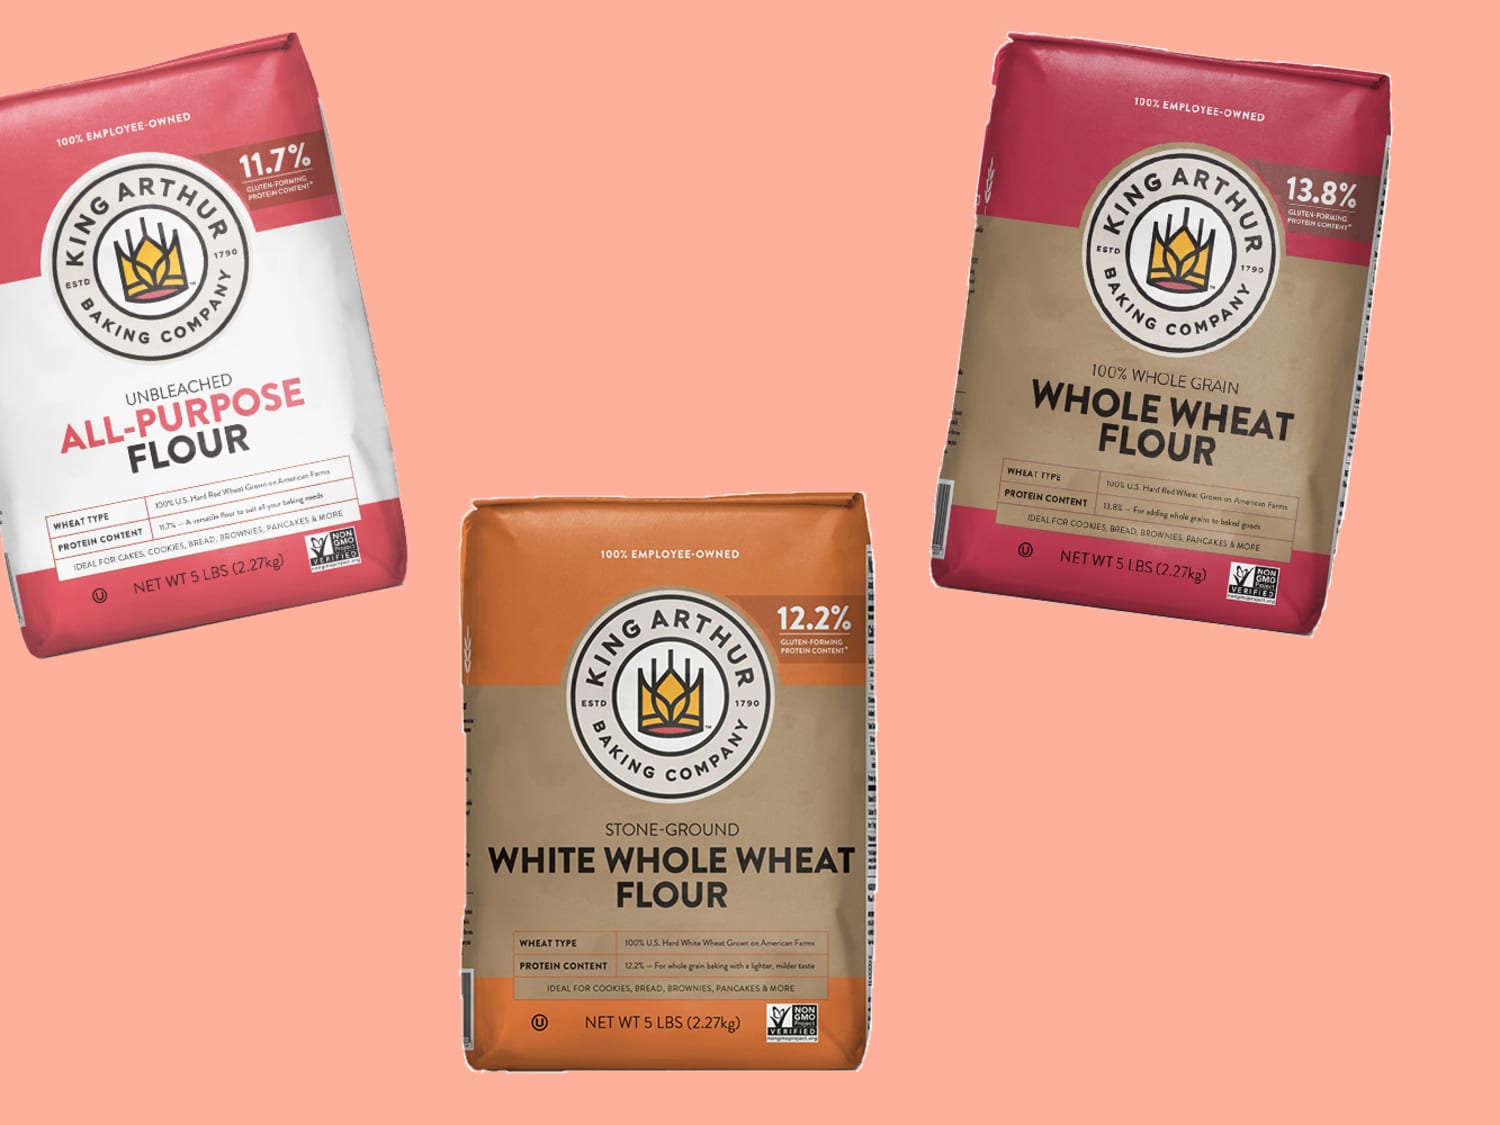 How to Substitute Whole-Wheat Flour for All-Purpose Flour